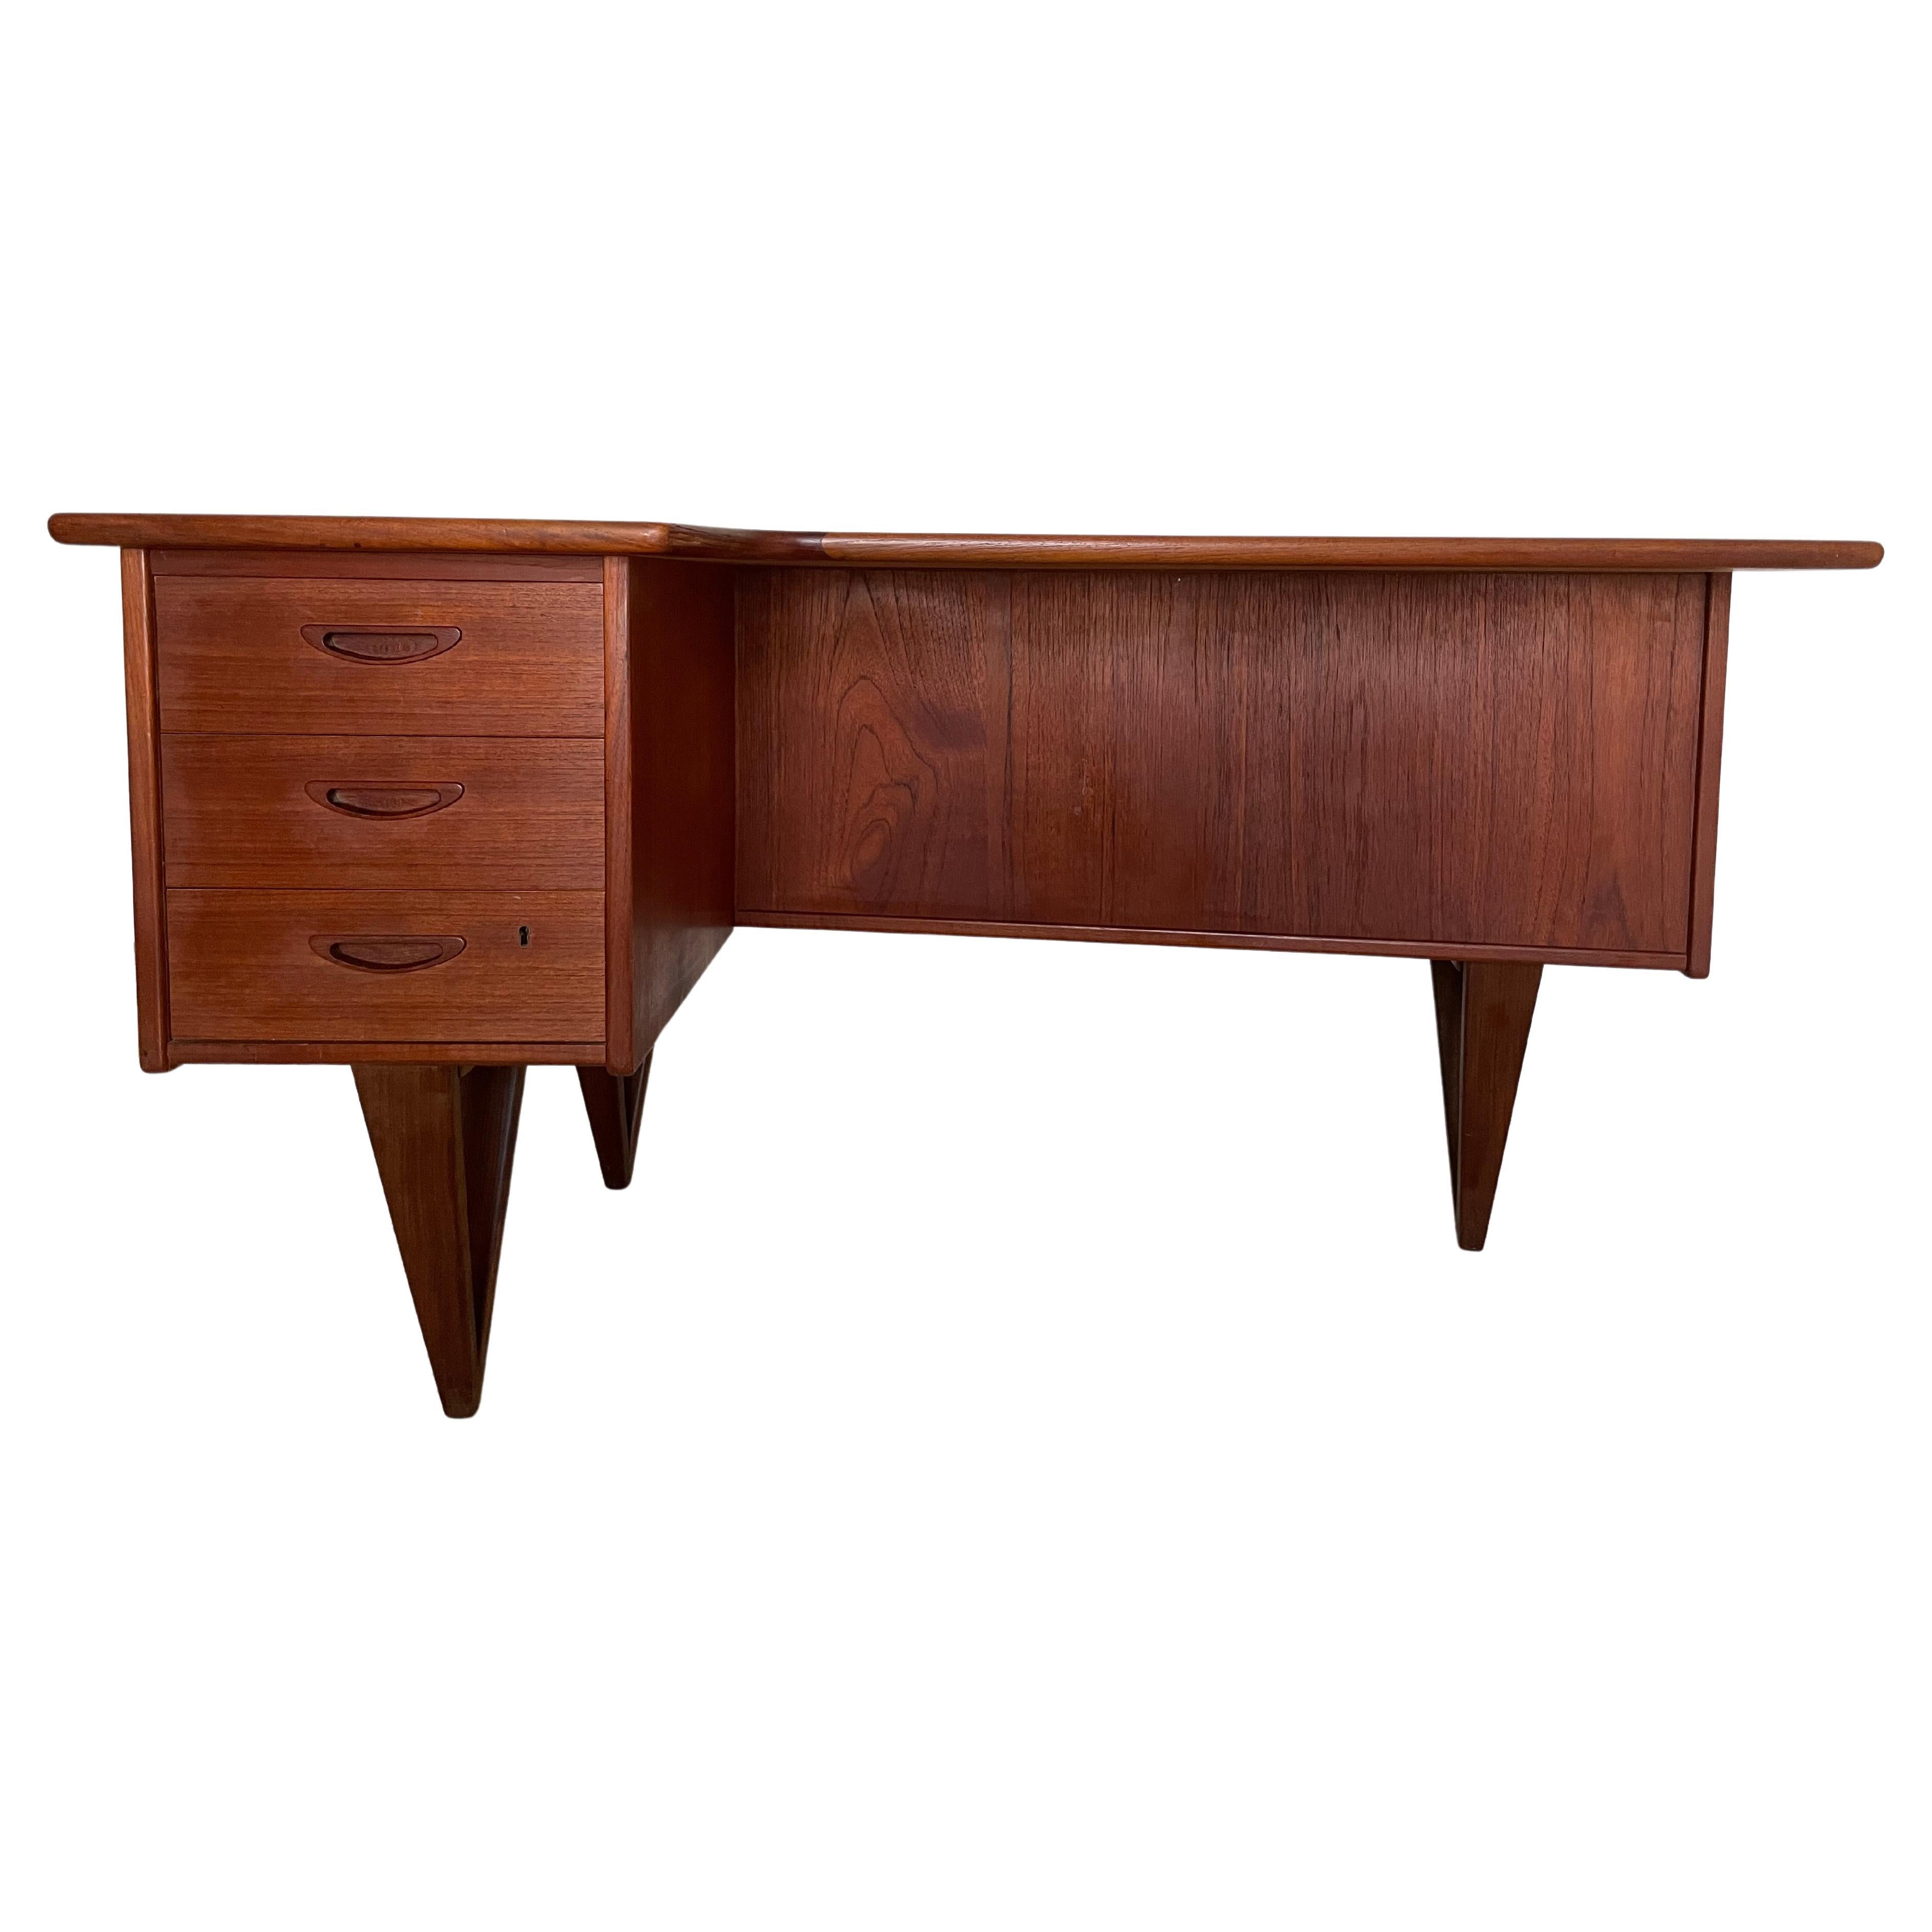 Desk designed by Göran Strand for Lelångs Möbelfabrik in Sweden in the early 1960s.
This model in teak wood has a very particular shape of the top, deeper on the left side where there are three drawers with handles carved in solid wood, the first